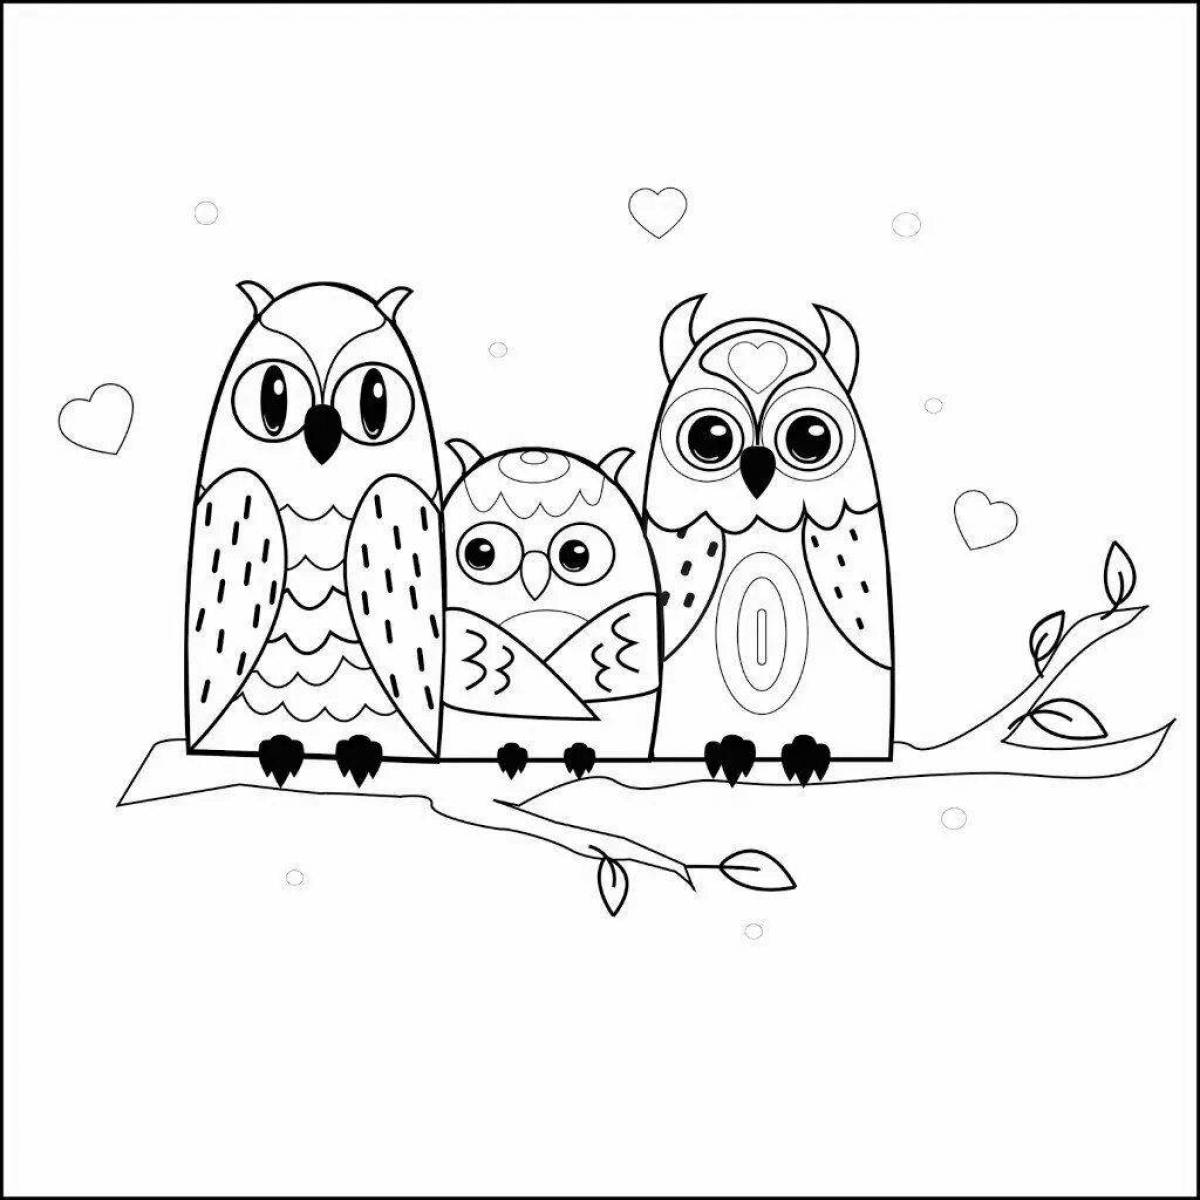 Adorable Owl Coloring Book for Toddlers